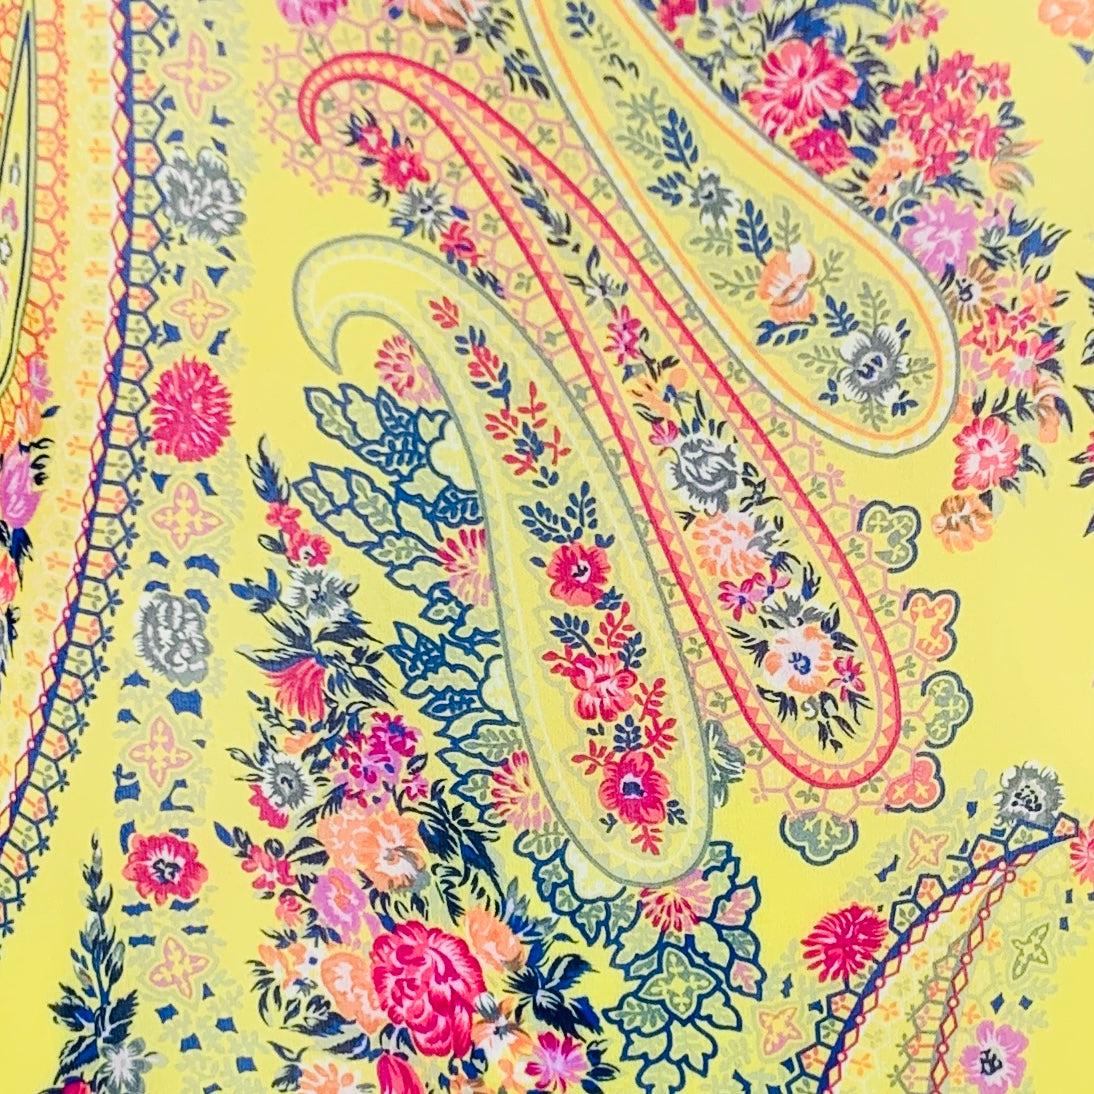 ETRO blouse comes in yellow and pink silk chiffon with paisley a motif, oversized design, draw string neckline, and see through aesthetic. Made in Italy.Excellent Pre-Owned Condition. 

Marked:   IT 38 

Measurements: 
 
Shoulder: 13.5 inches Bust: